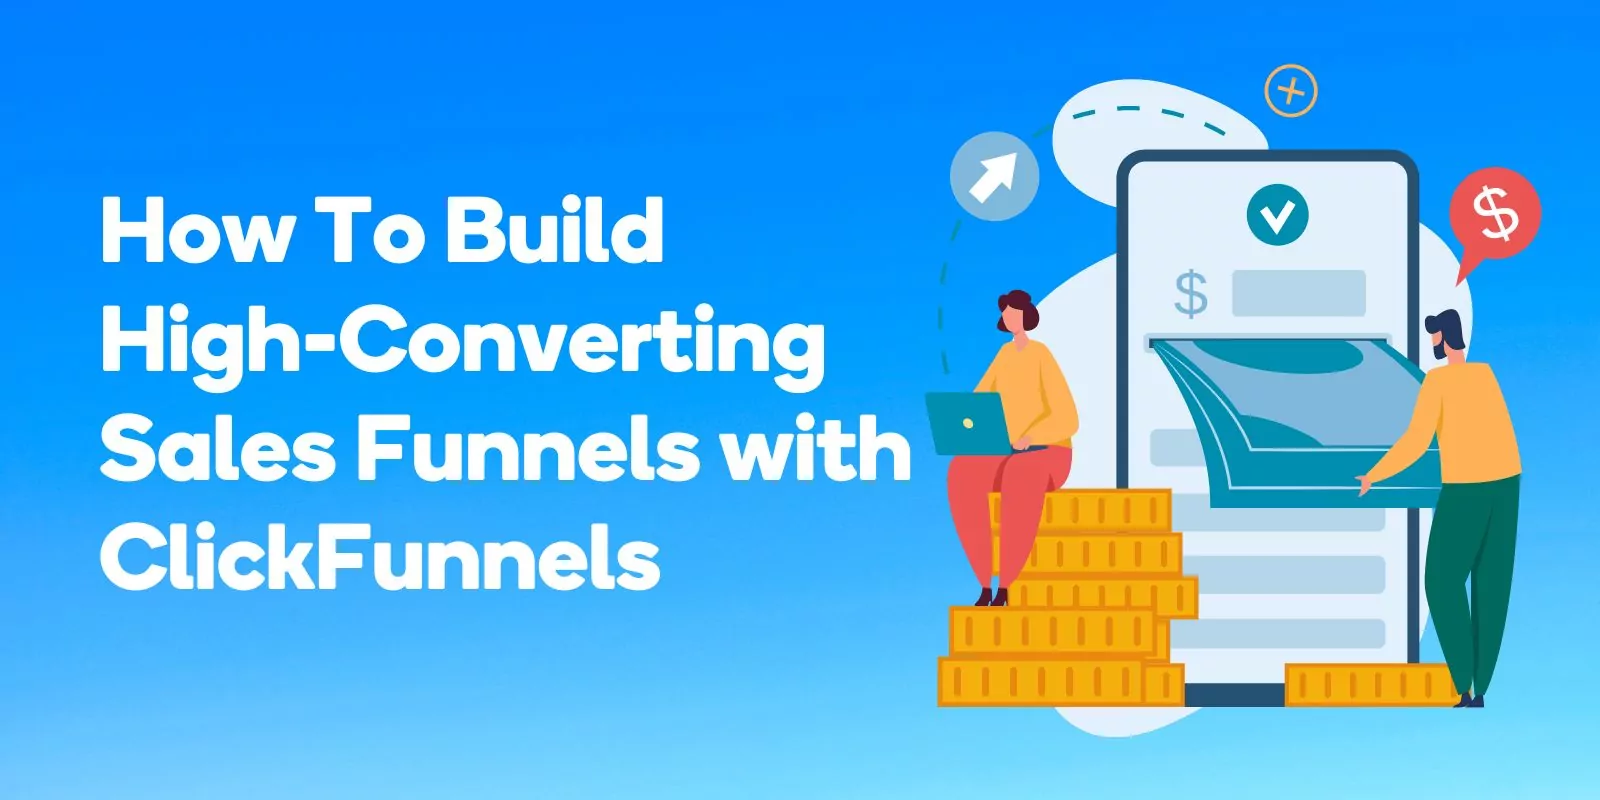 How To Build High-Converting Sales Funnels with ClickFunnels